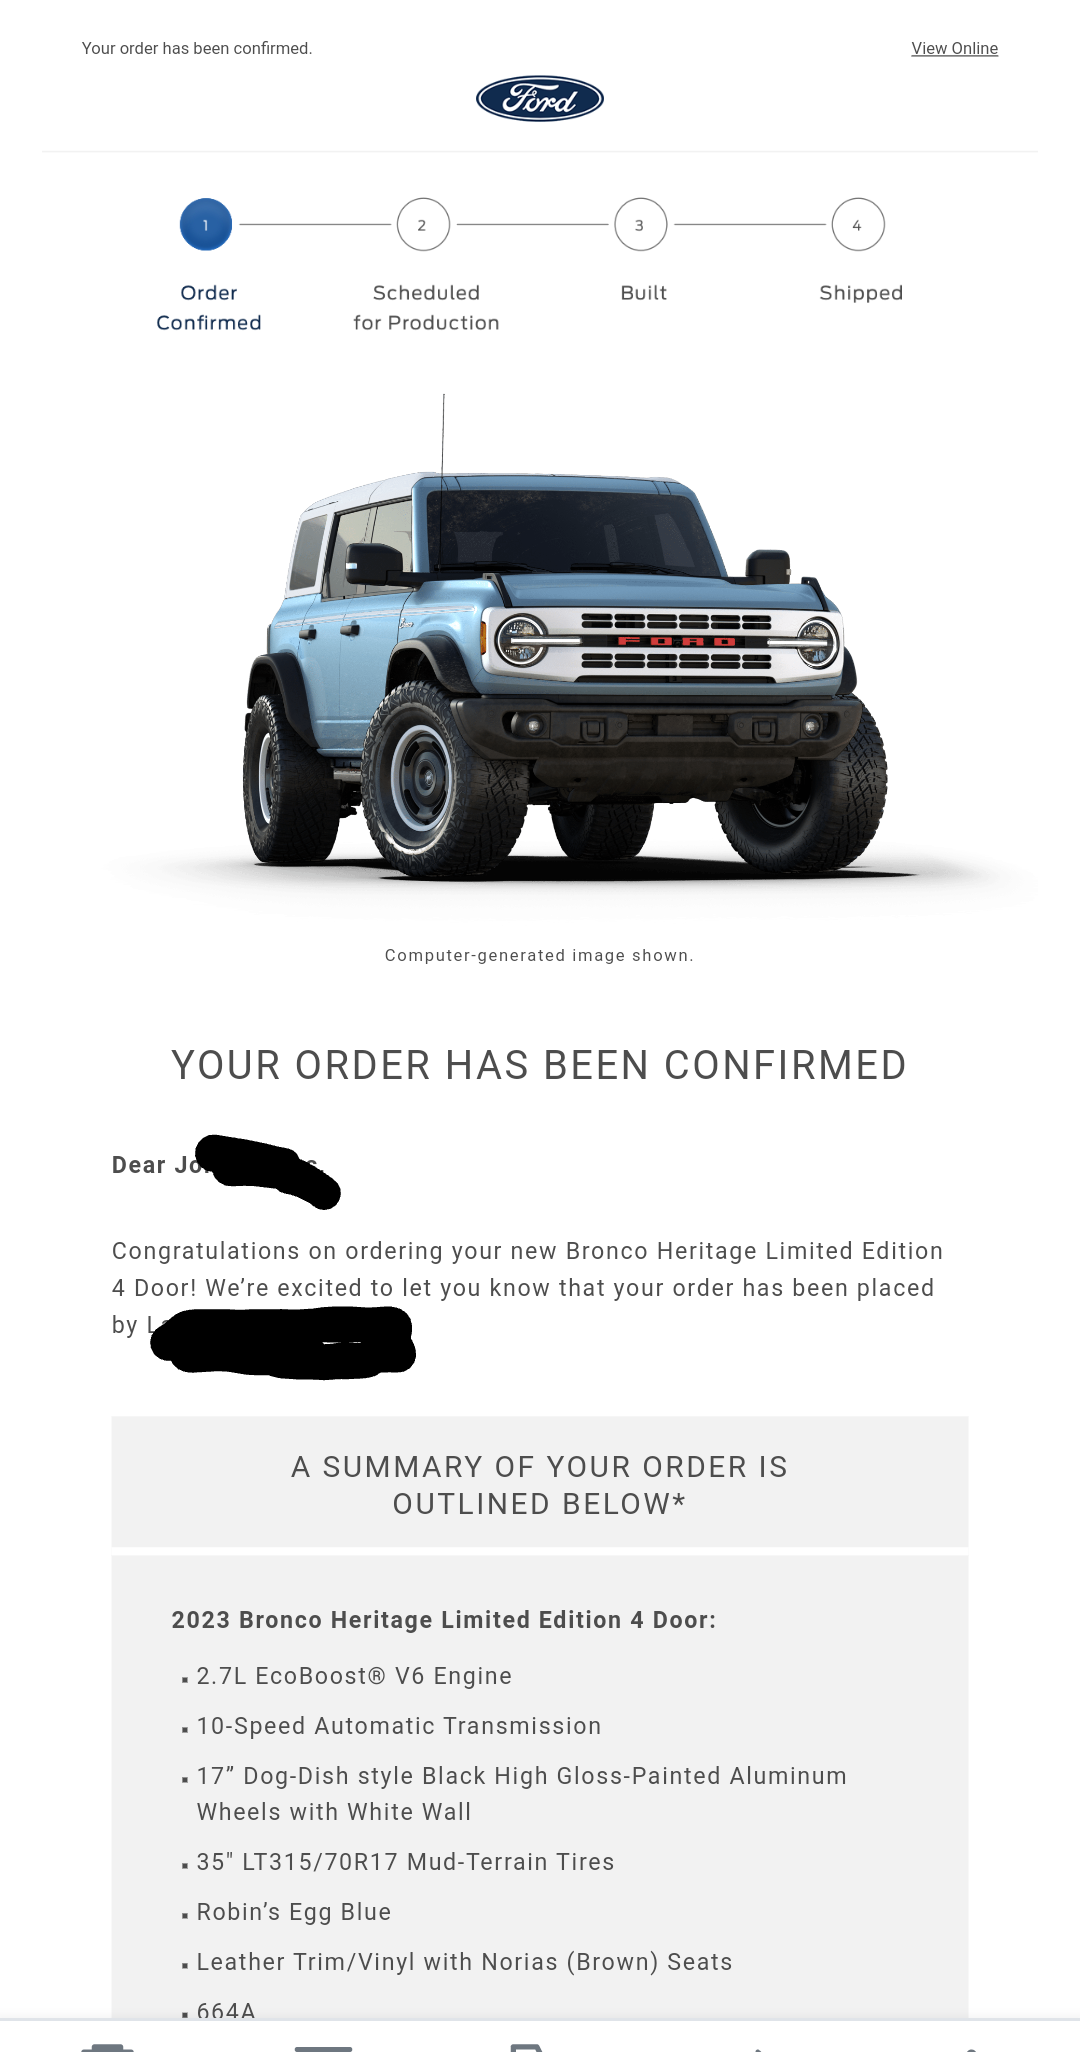 Ford Bronco My Bronco Heritage Limited Edition order confirmed Screenshot_20221005-052527-321~3